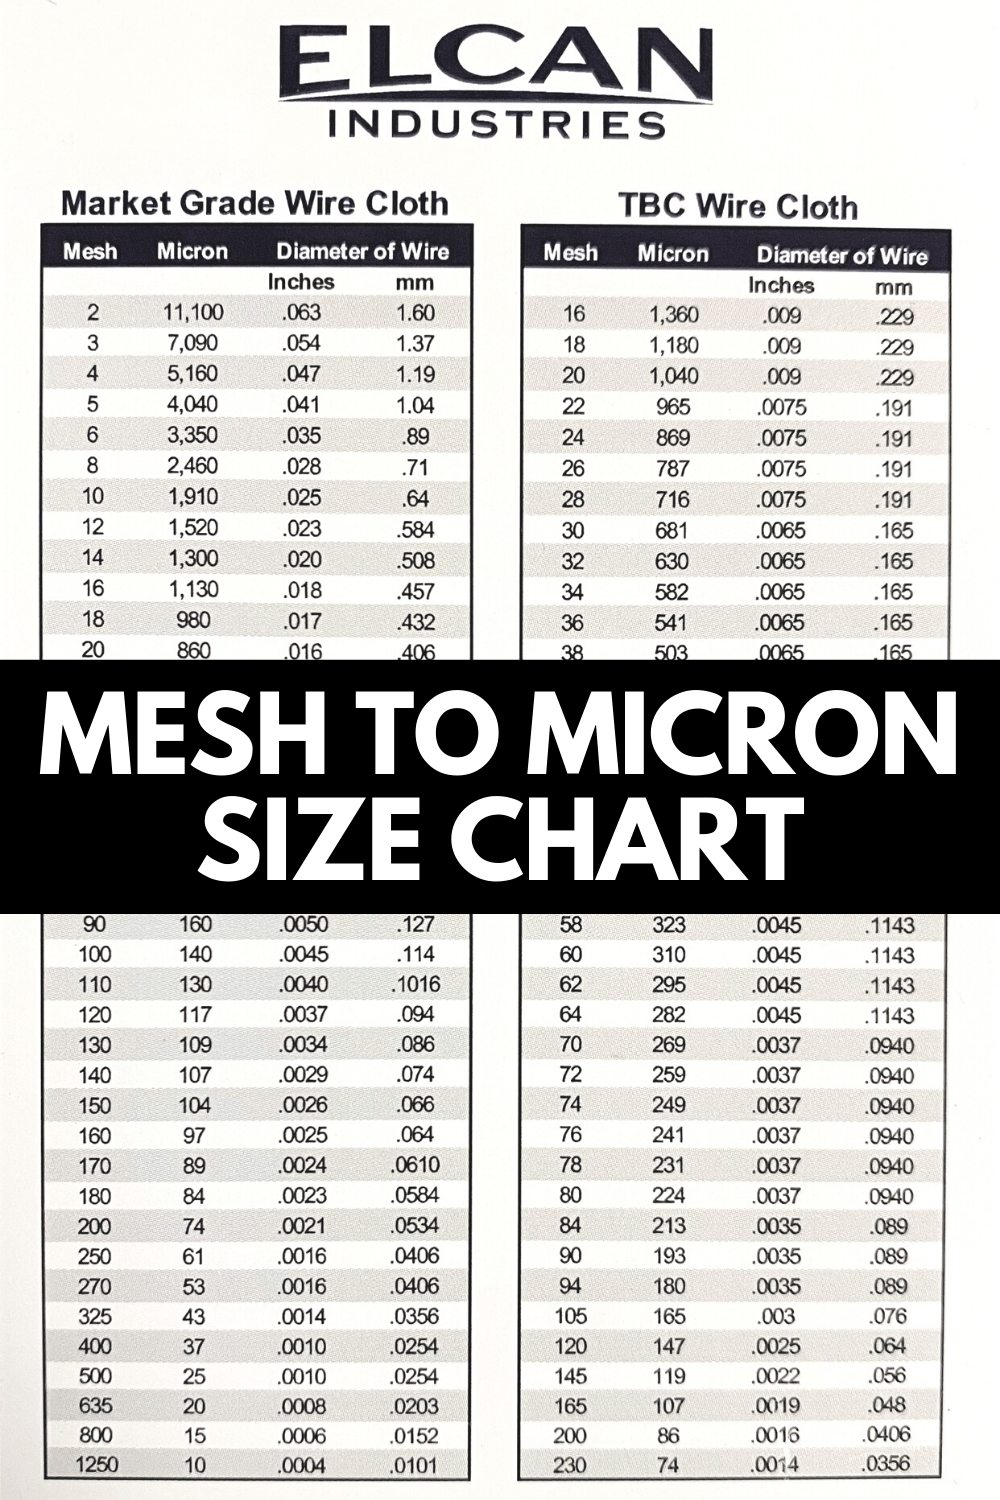 Mesh to Micron Chart | Micron Size | Elcan Industries